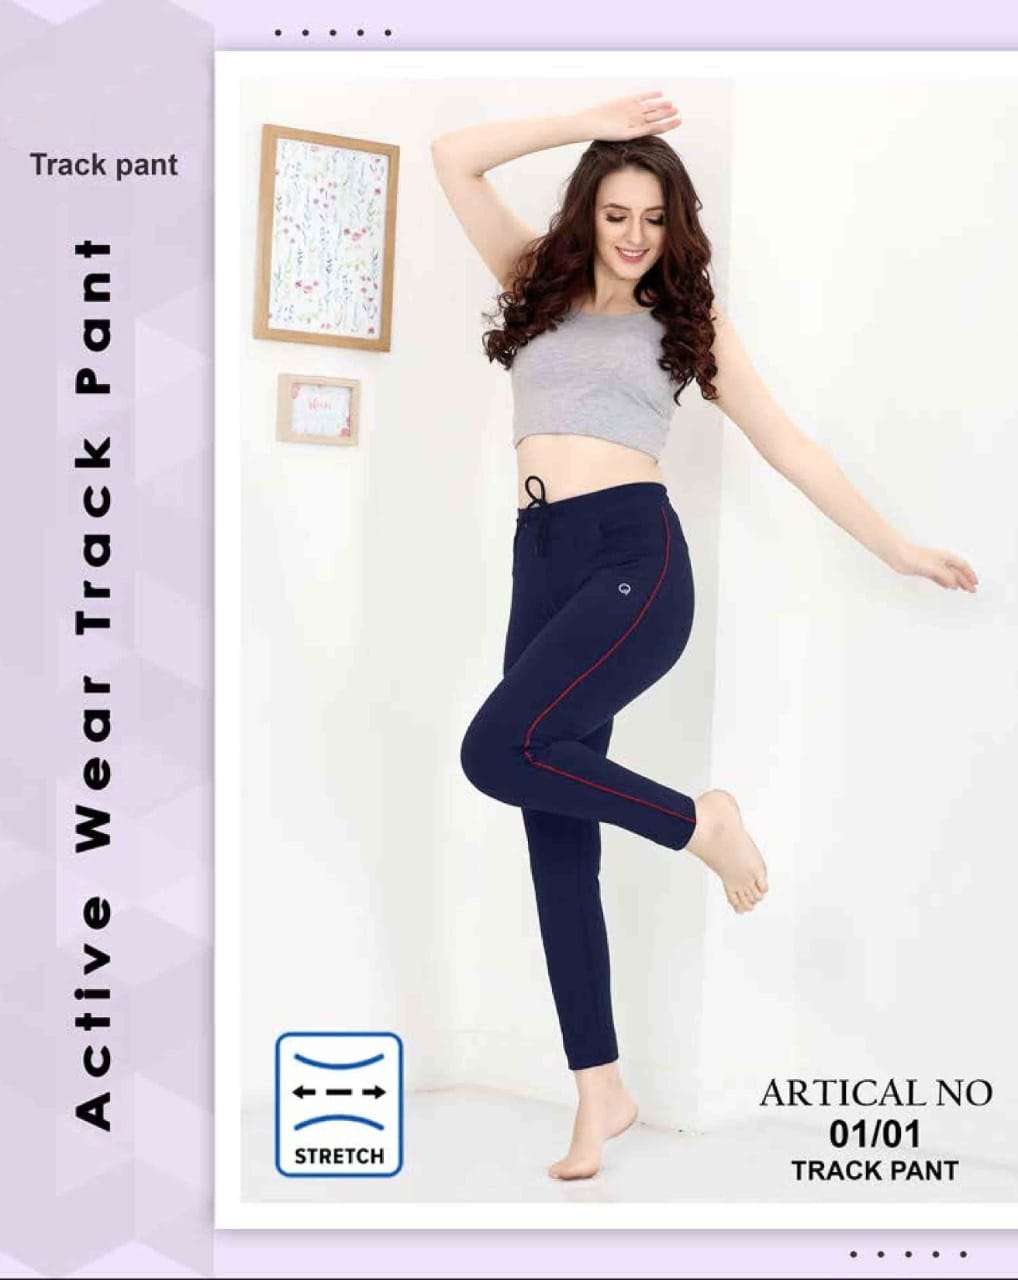 French Connection Solid Women Blue Track Pants - Buy French Connection  Solid Women Blue Track Pants Online at Best Prices in India | Flipkart.com